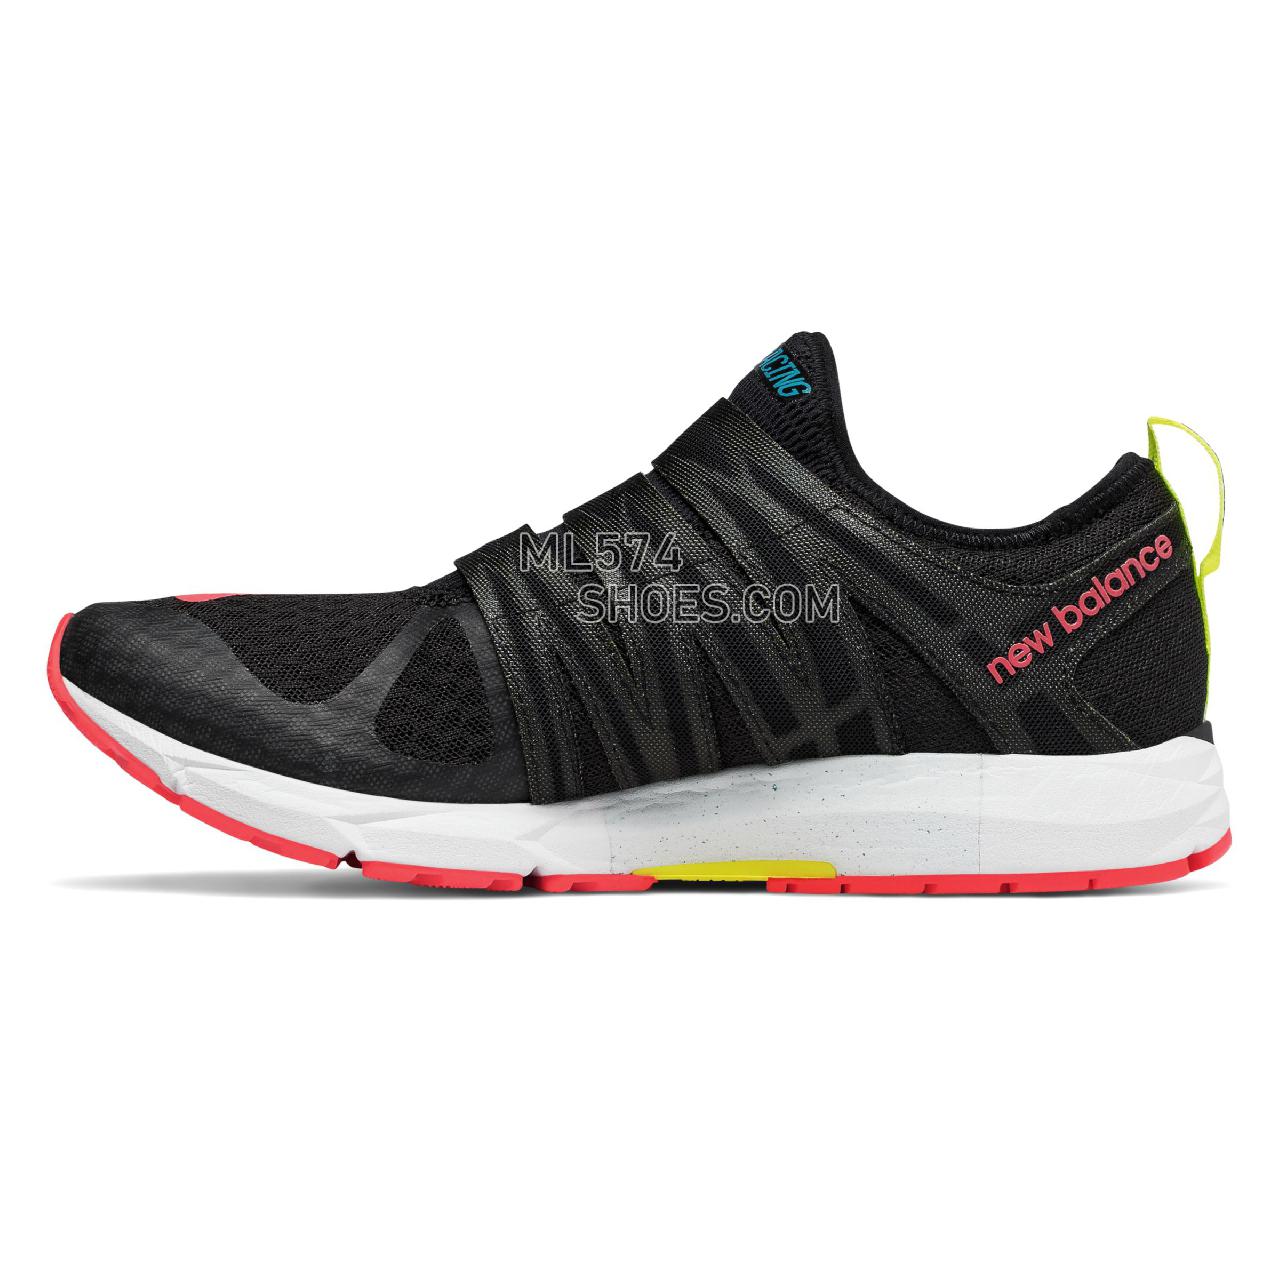 New Balance 1500T2 - Women's 1500 - Running Black with Hi-Lite and Vivid Coral - W1500BB4